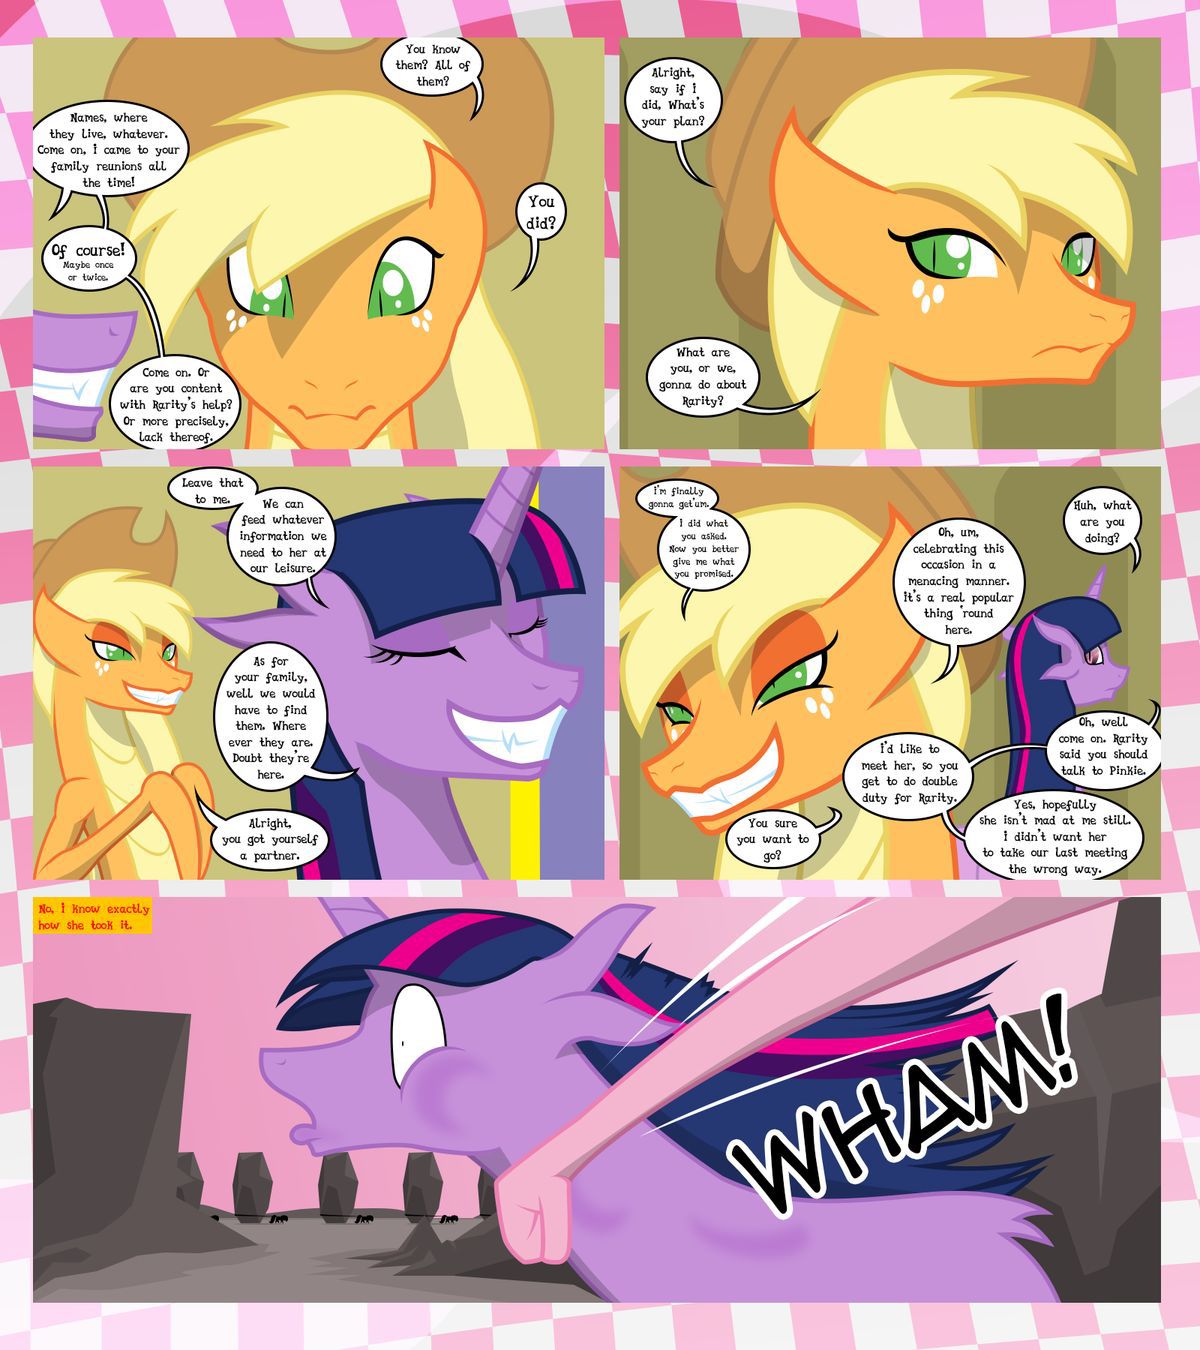 [GatesMcCloud] Cutie Mark Crusaders 10k: Chapter 3 - The Lost (My Little Pony: Friendship is Magic) [English] [Ongoing] 59